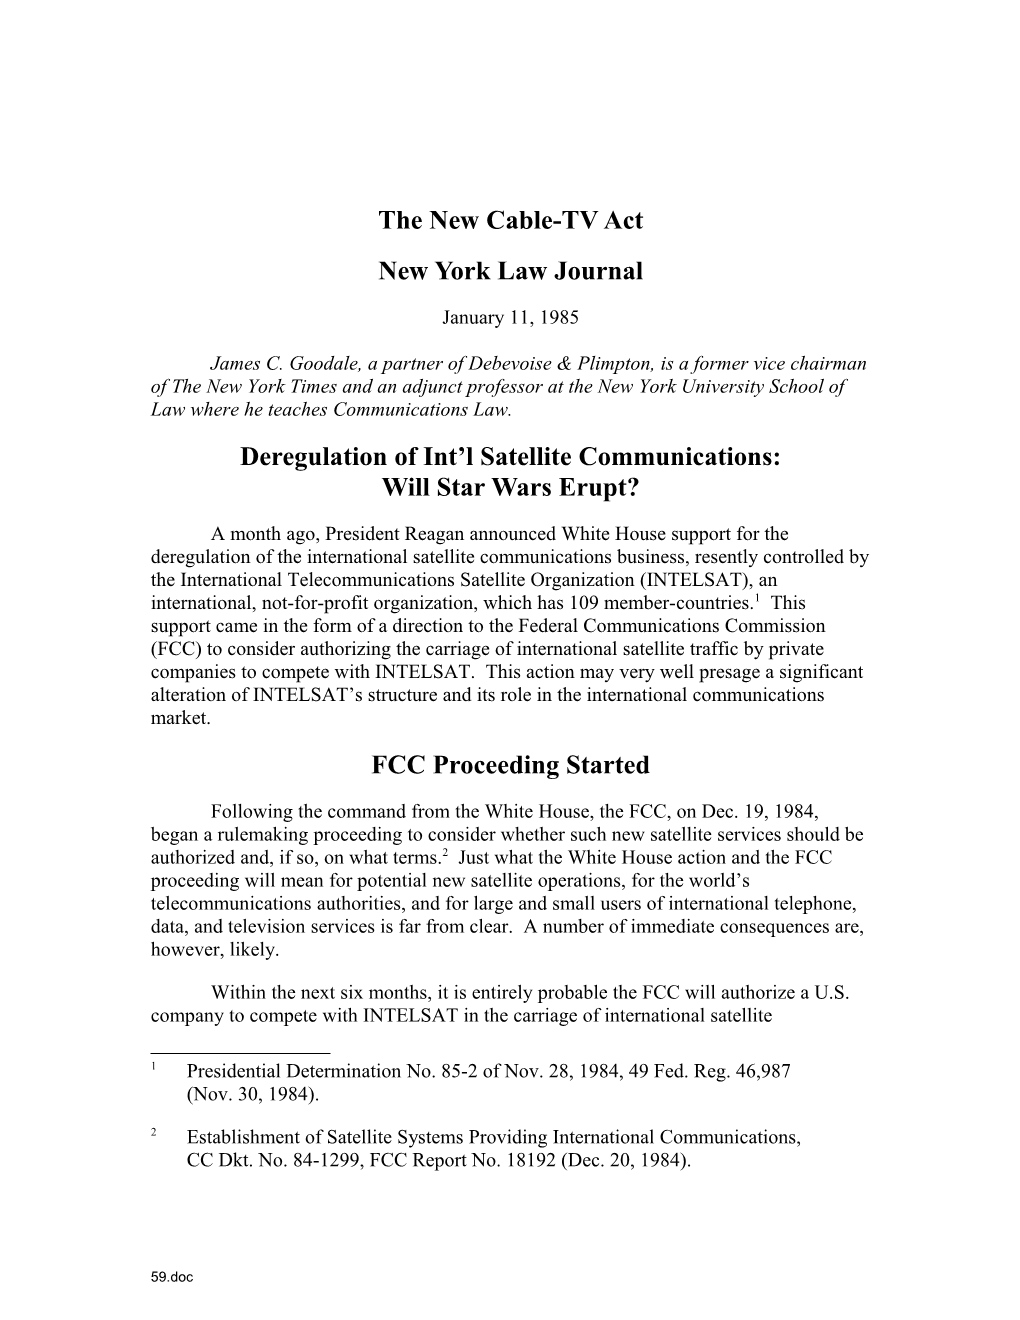 The Cable-TV Act